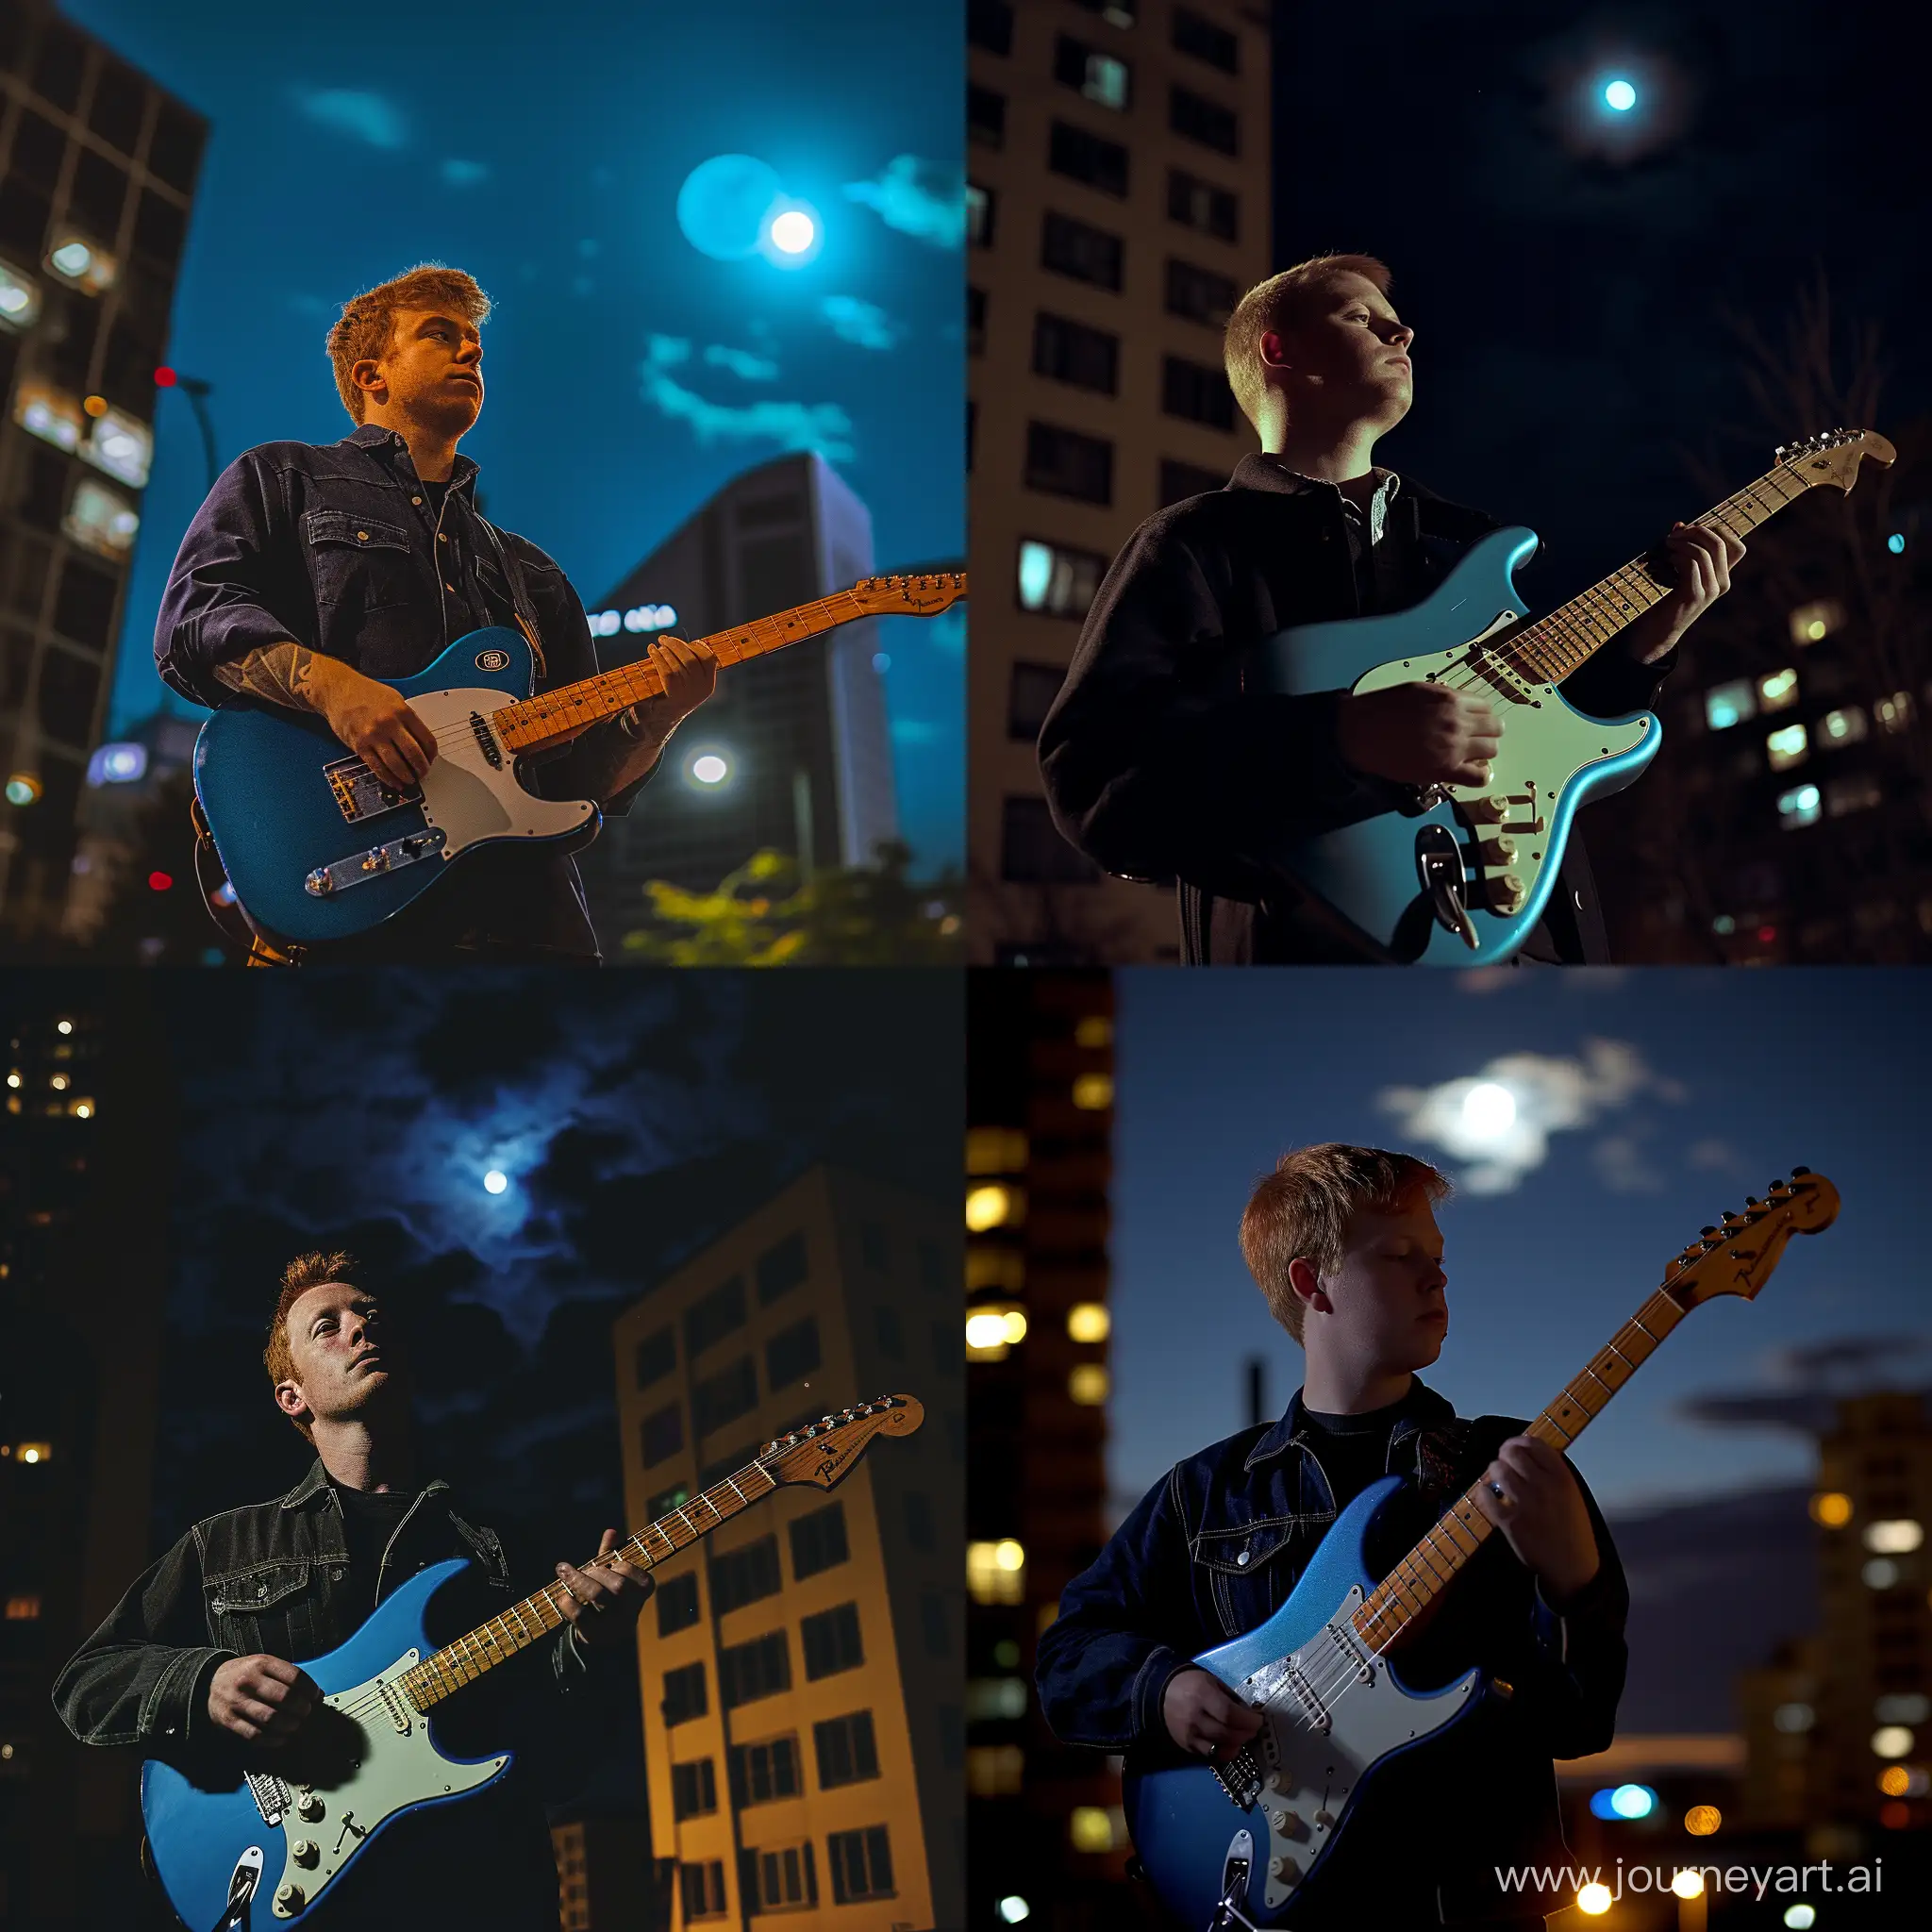 Curious redhead with short hair man guitarist with blue telecaster fender Investigates Mysterious lighting in the sky, urban night buildings, in Dimly Lit Scene Vintage, arri camera with panasonic lenses, moon